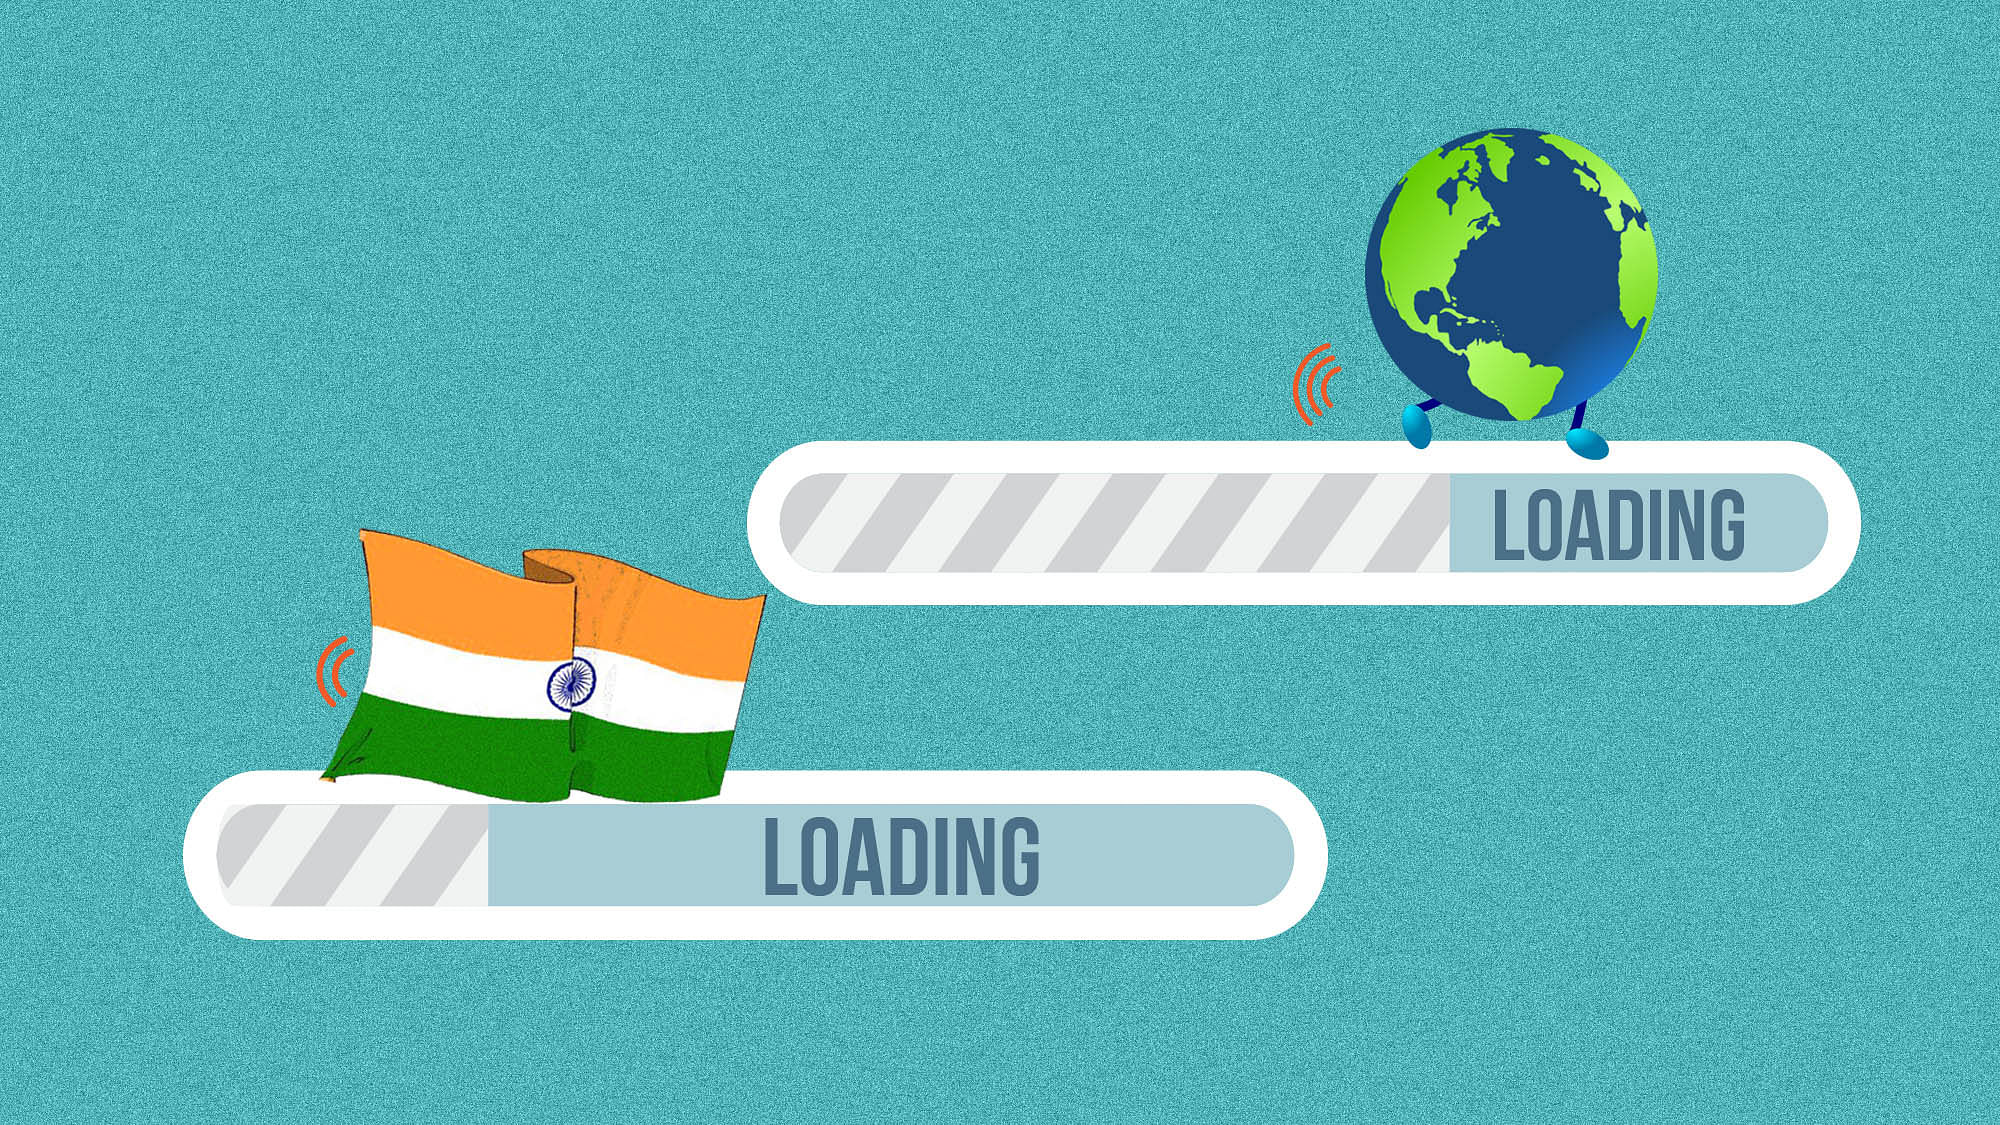 Internet speeds in India are even below countries like Pakistan and Sri Lanka.&nbsp;